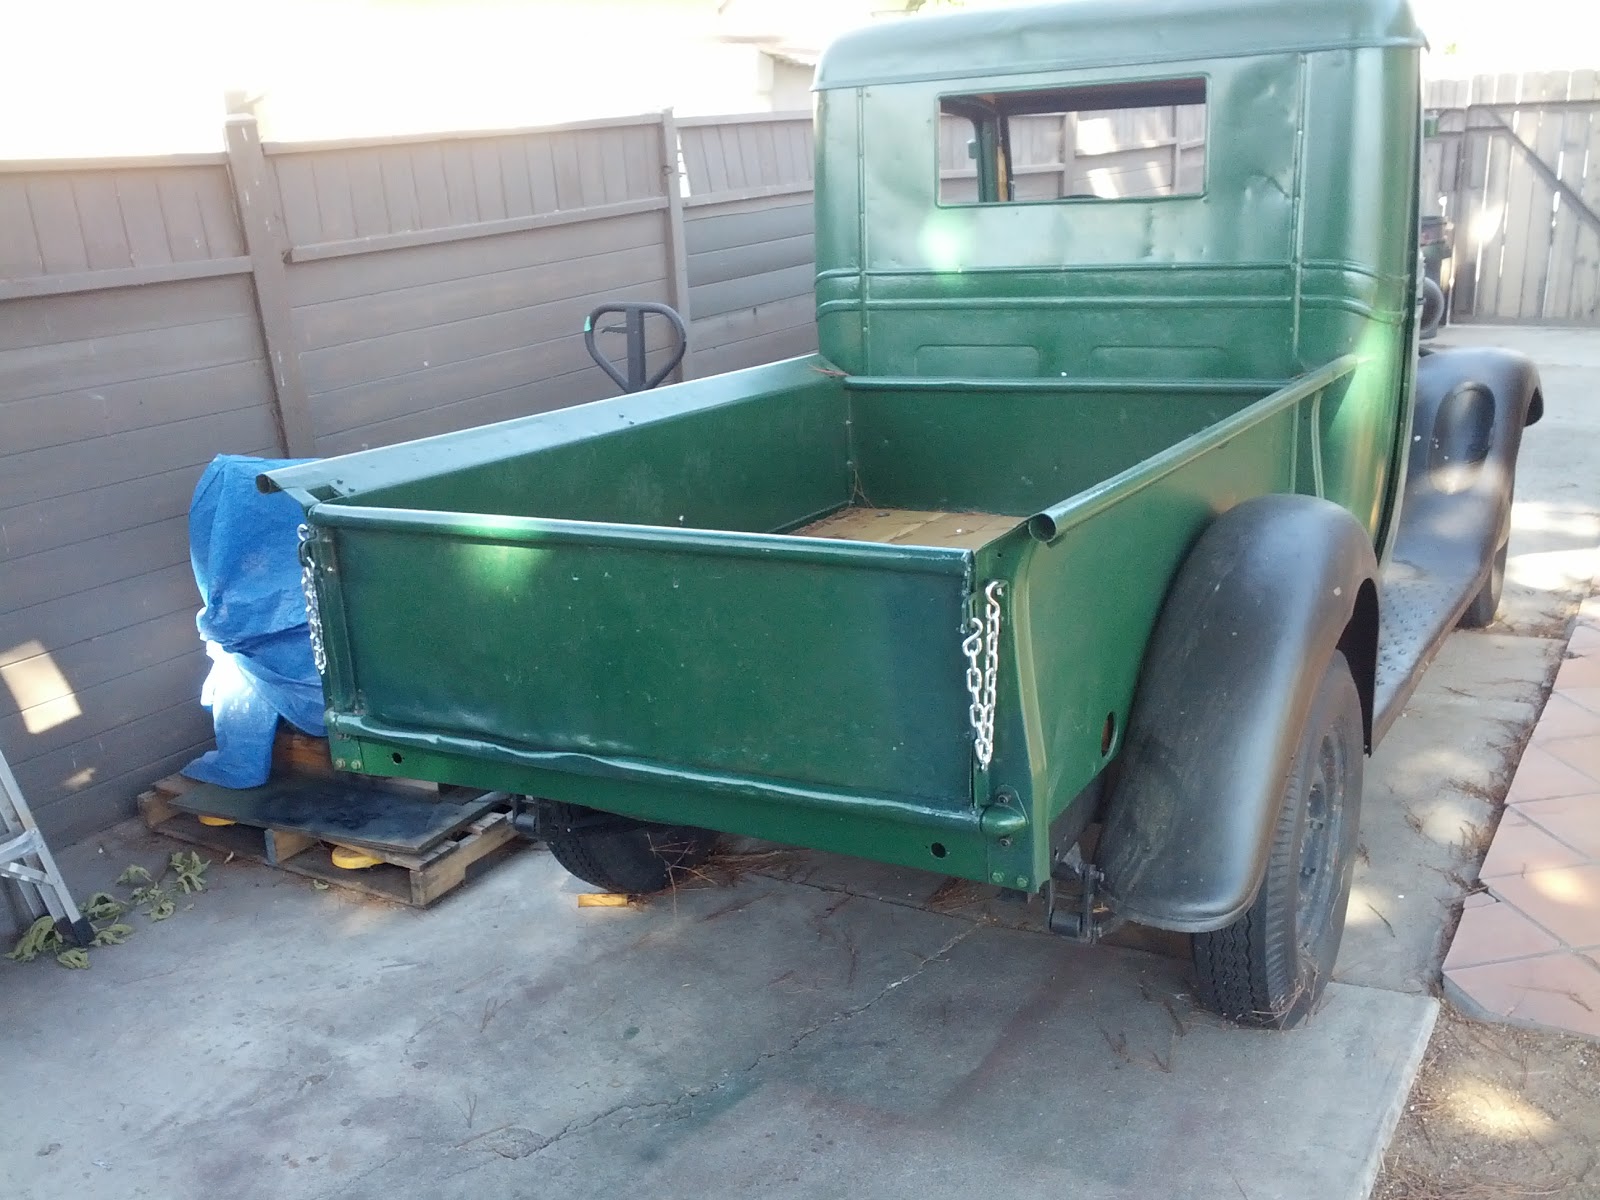 My 1935 Chevy Pickup Restoration and EV Conversion Project